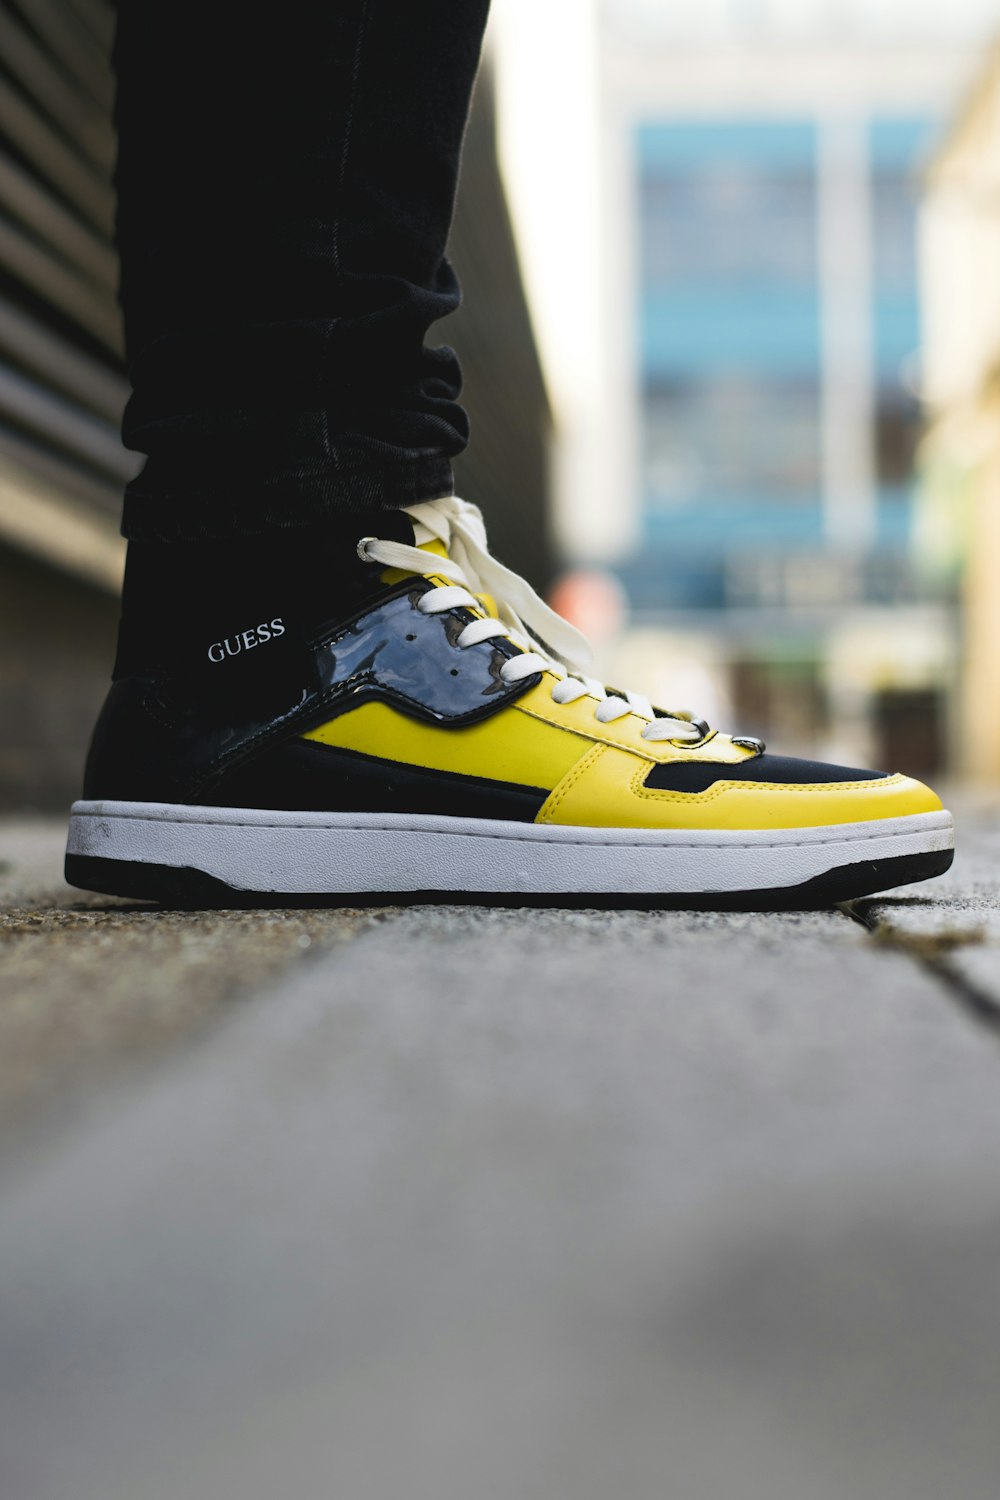 pair of yellow-and-black Guess high-top sneakers photo – Free Clothing  Image on Unsplash